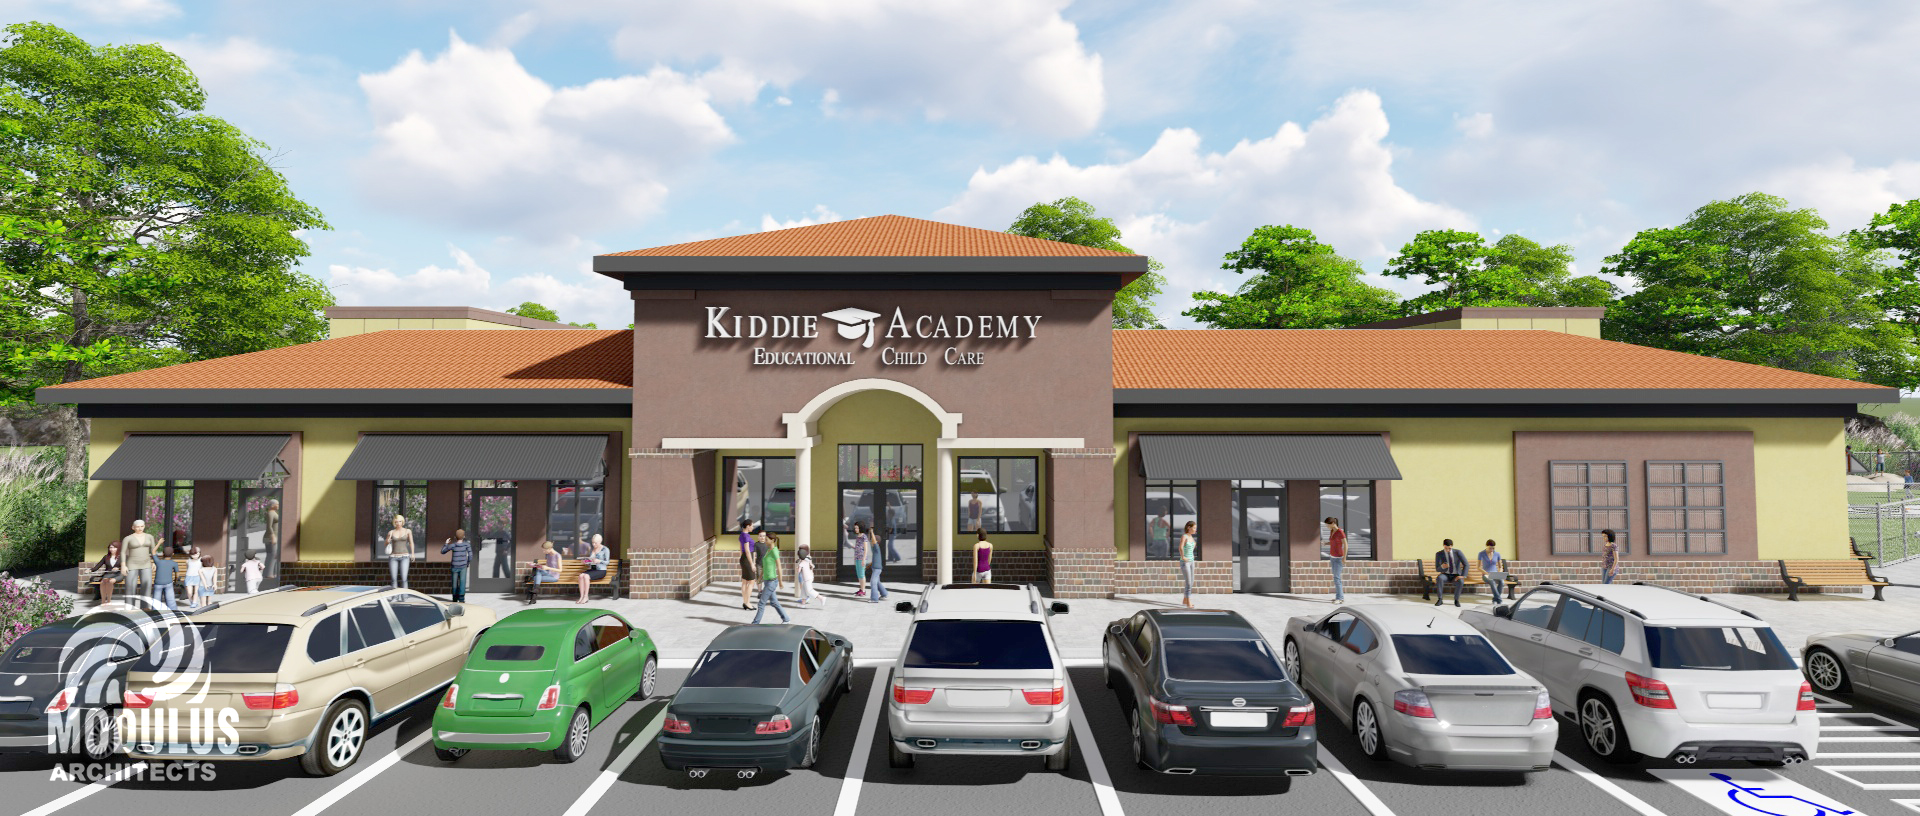 Featured image for “Kiddie Academy East Side Albuquerque, New Mexico”